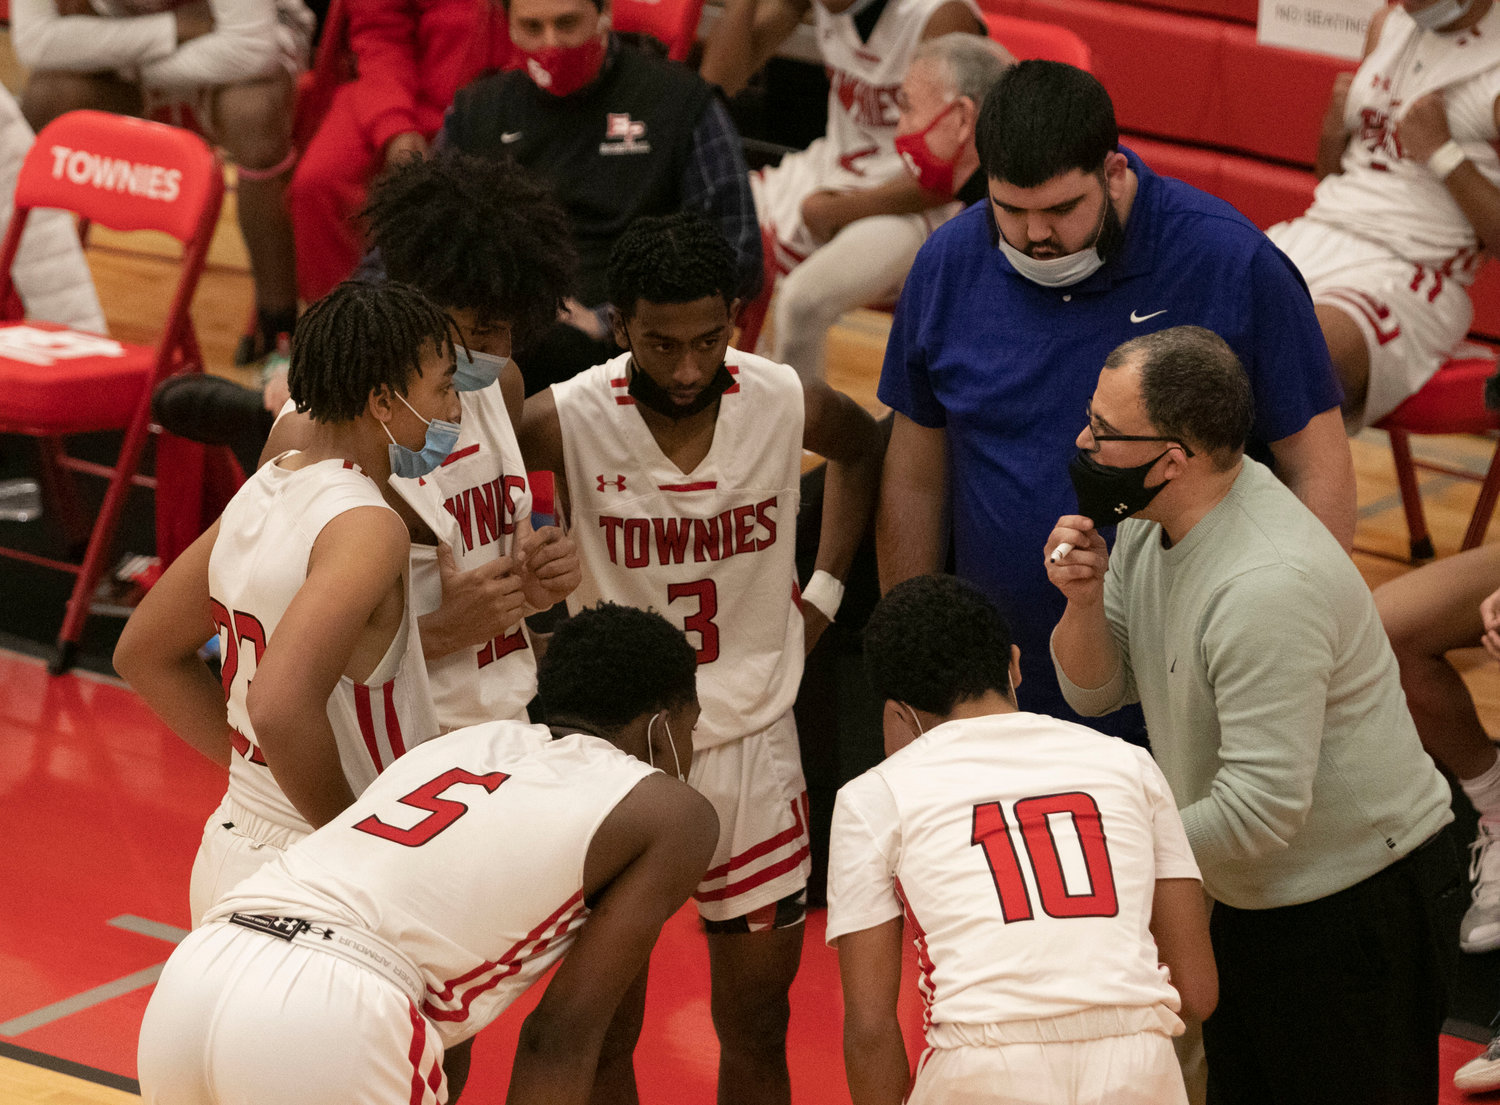 Head coach Joe Andrade talks strategy with the team during a time out in the third quarter.